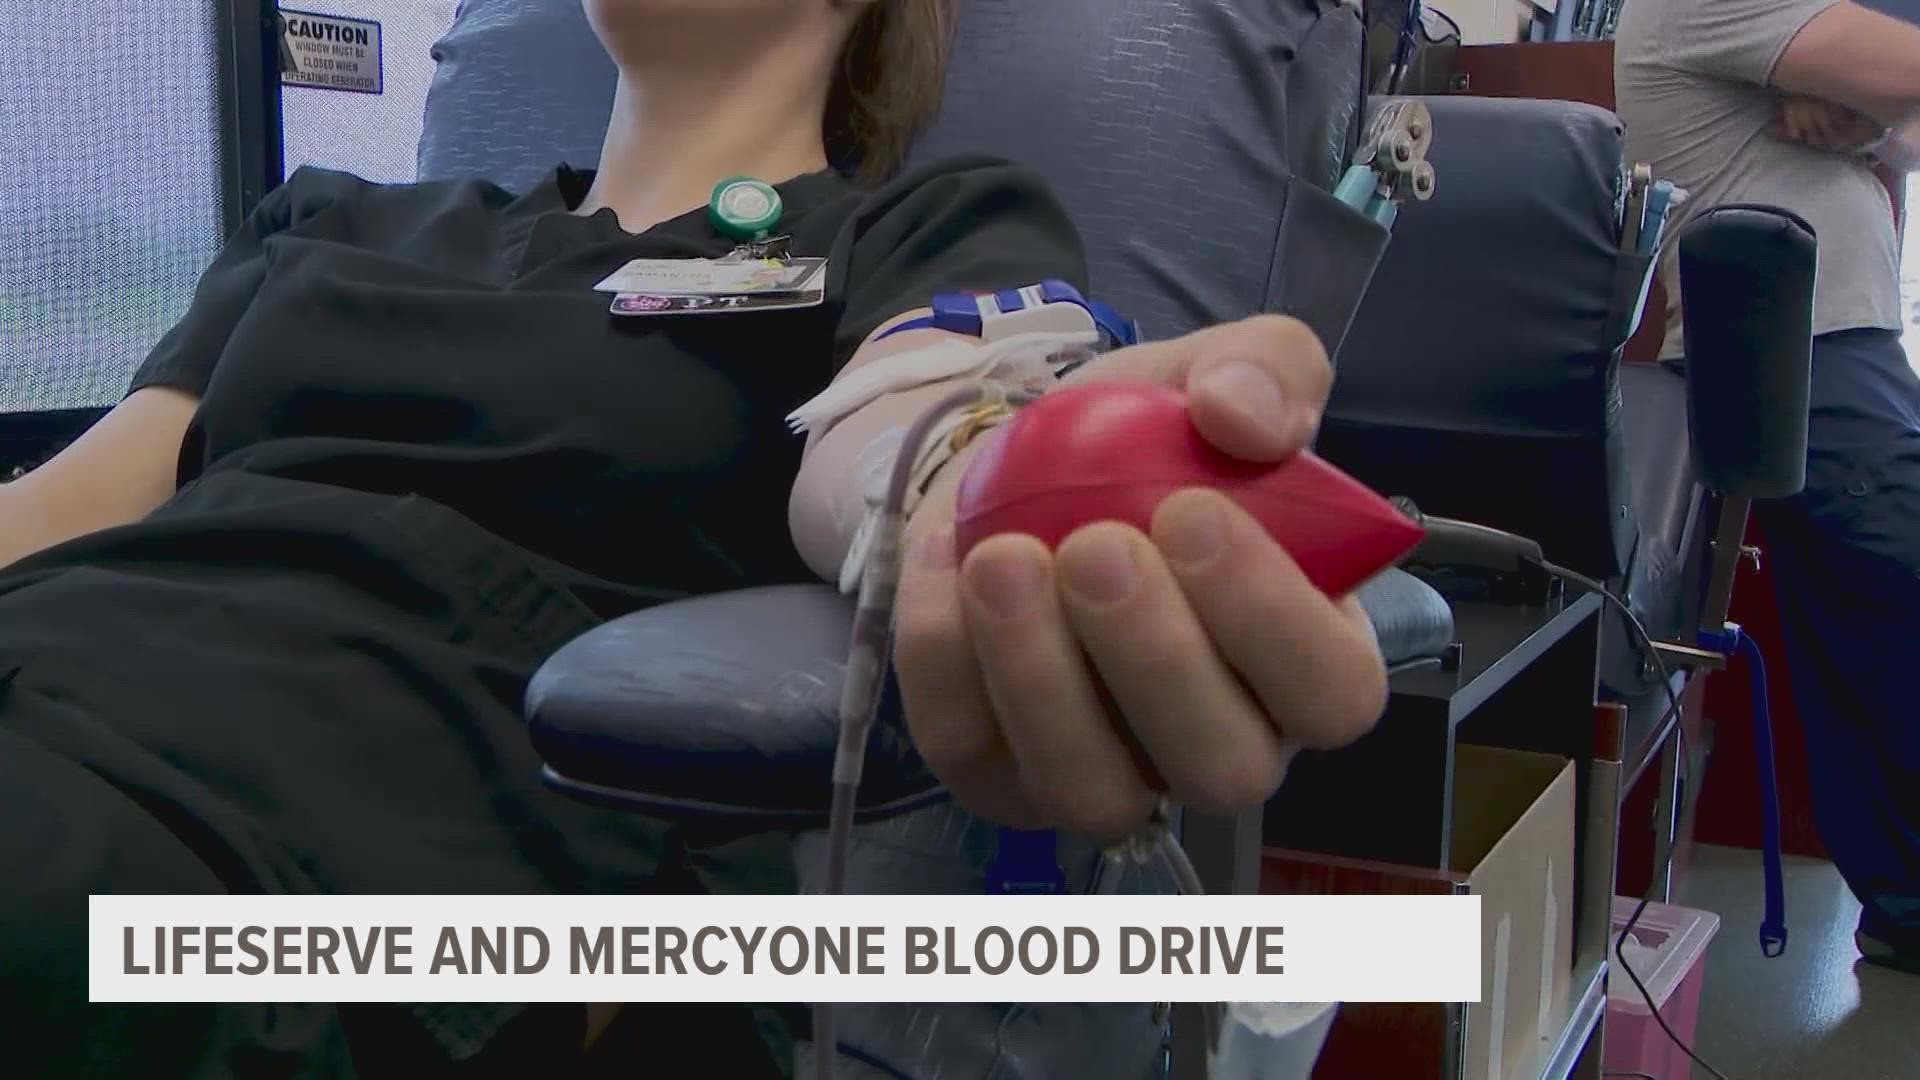 100 percent of the blood products needed at MercyOne and on MercyOne Air Med flight come from LifeServe blood donors.